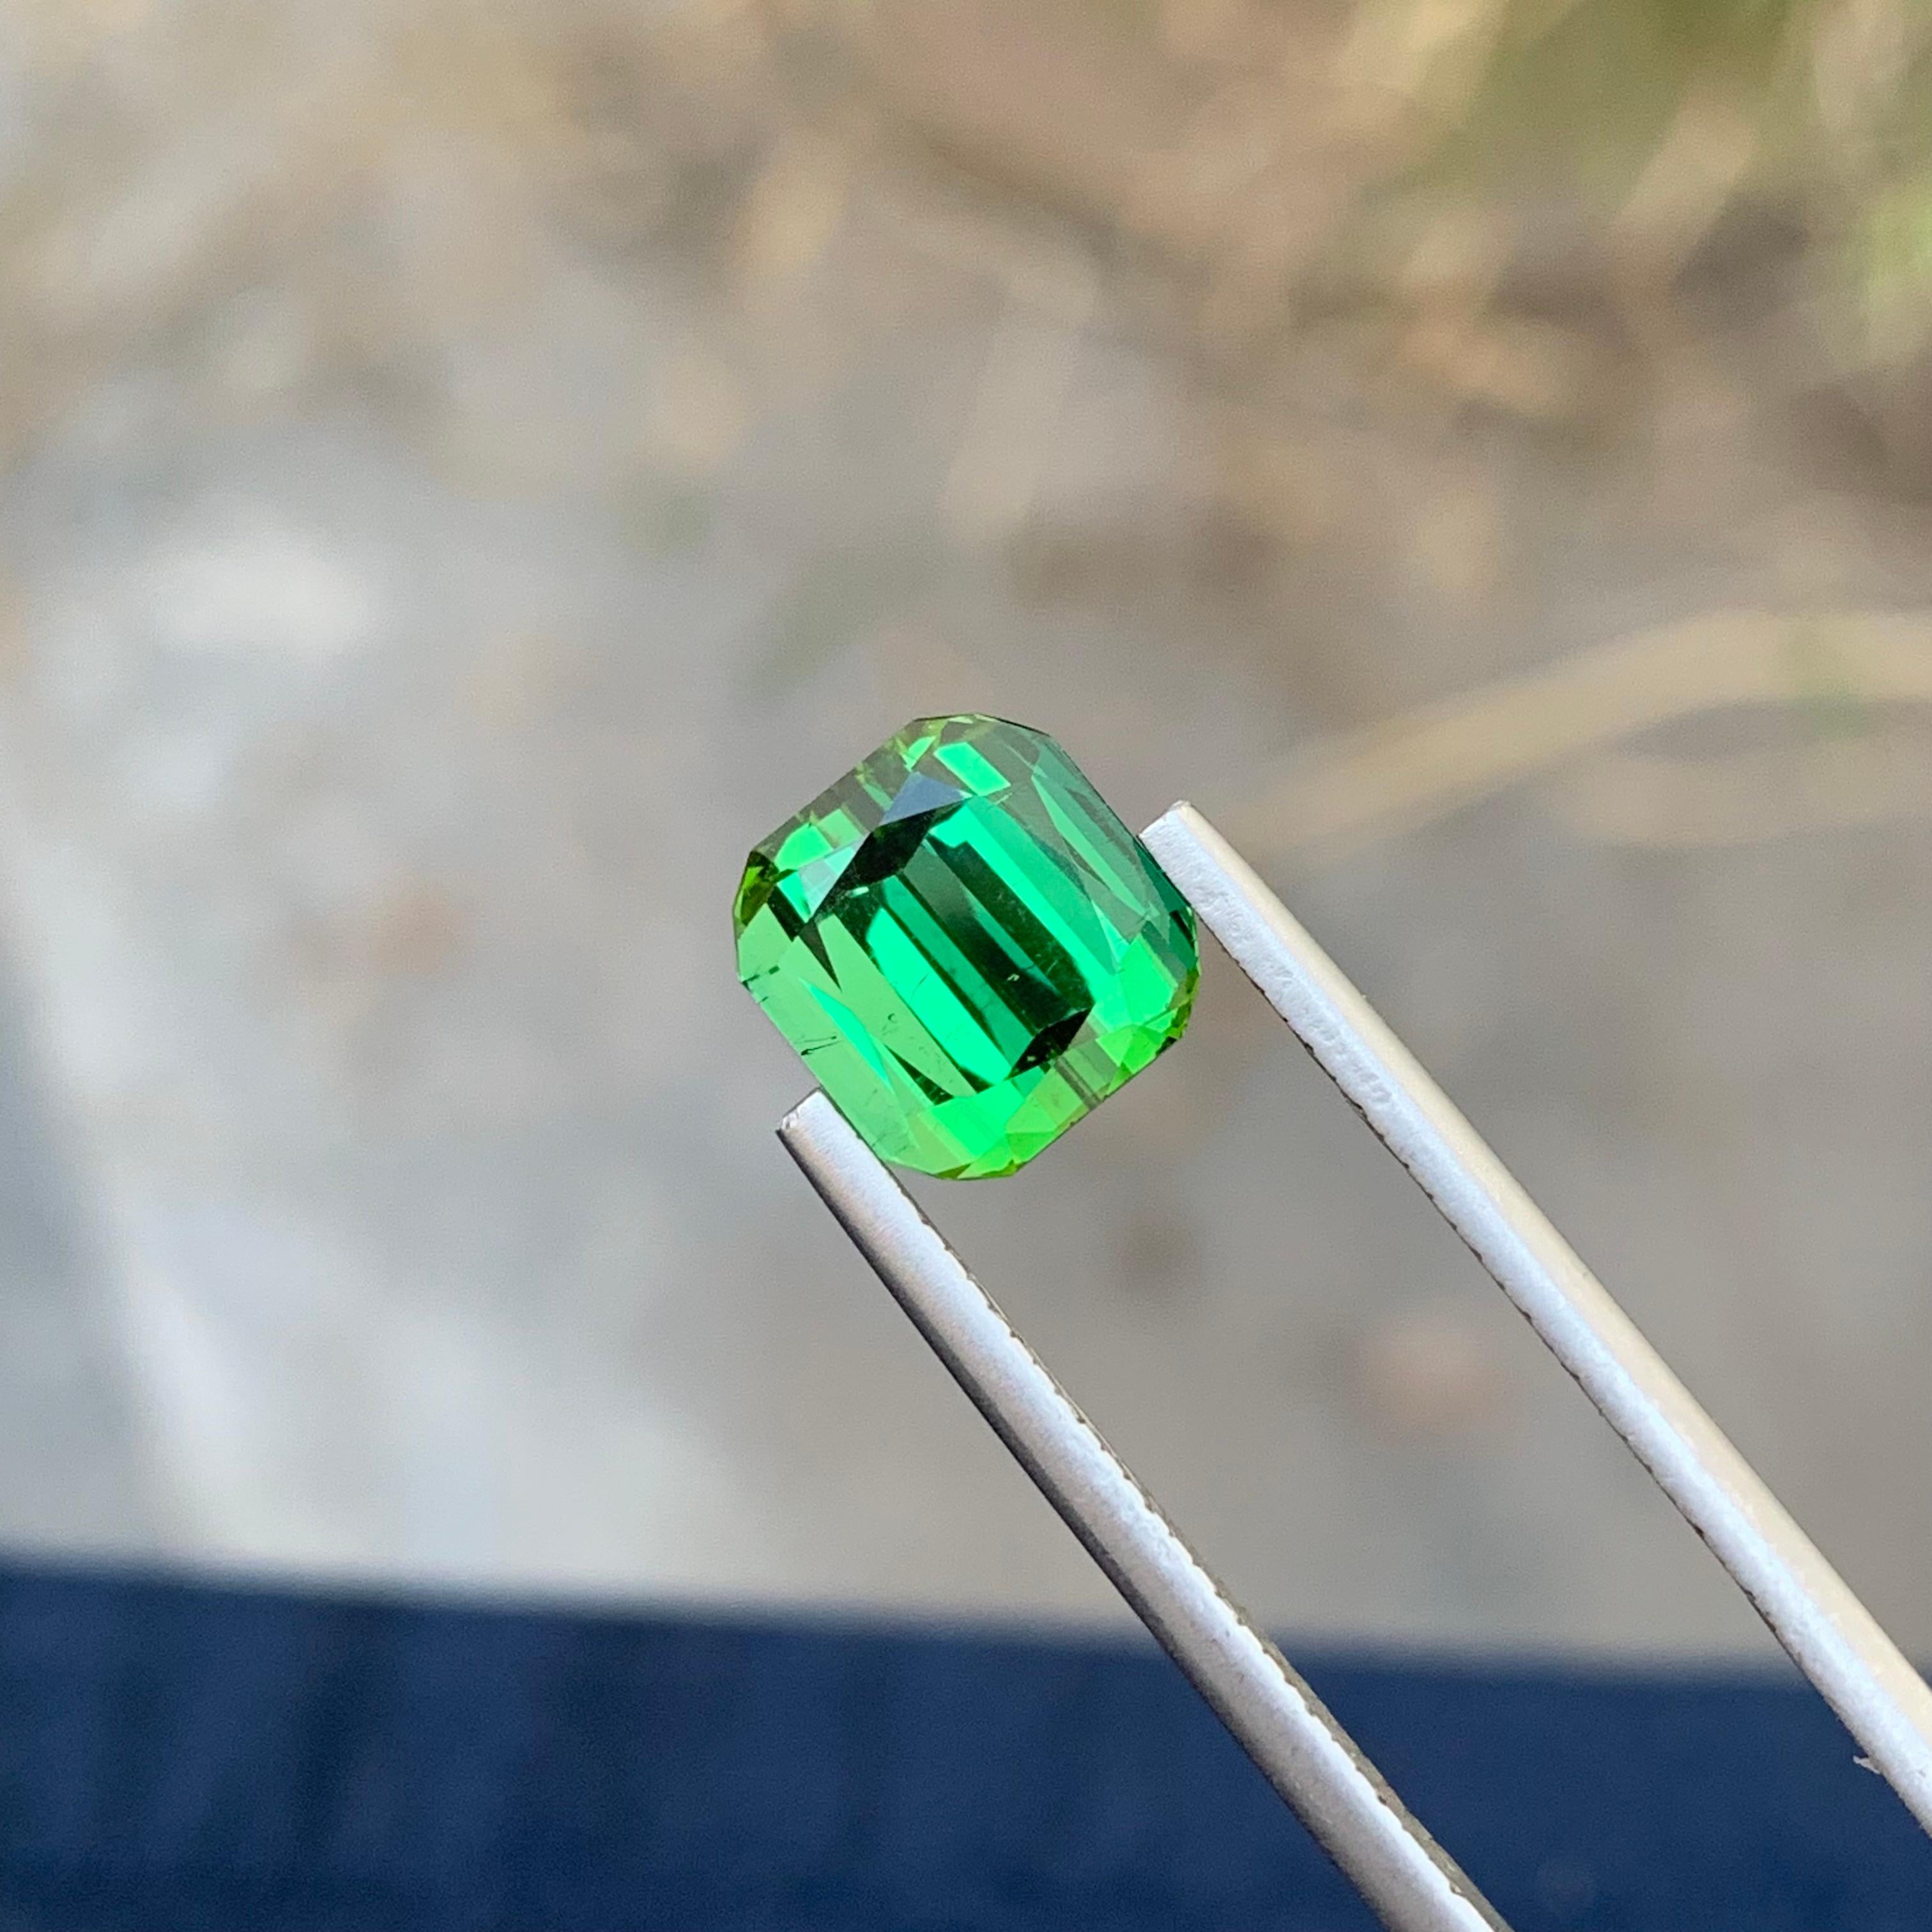 Loose Tourmaline 
Weight: 4.10 Carats 
Dimension: 8.6x8.2x7 Mm
Origin: Kunar Afghanistan 
Shape: Cushion
Color: Green
Treatment: Non
Certificate: On Demand 
Green Tourmaline, a gemstone of unparalleled beauty, is a member of the Tourmaline mineral